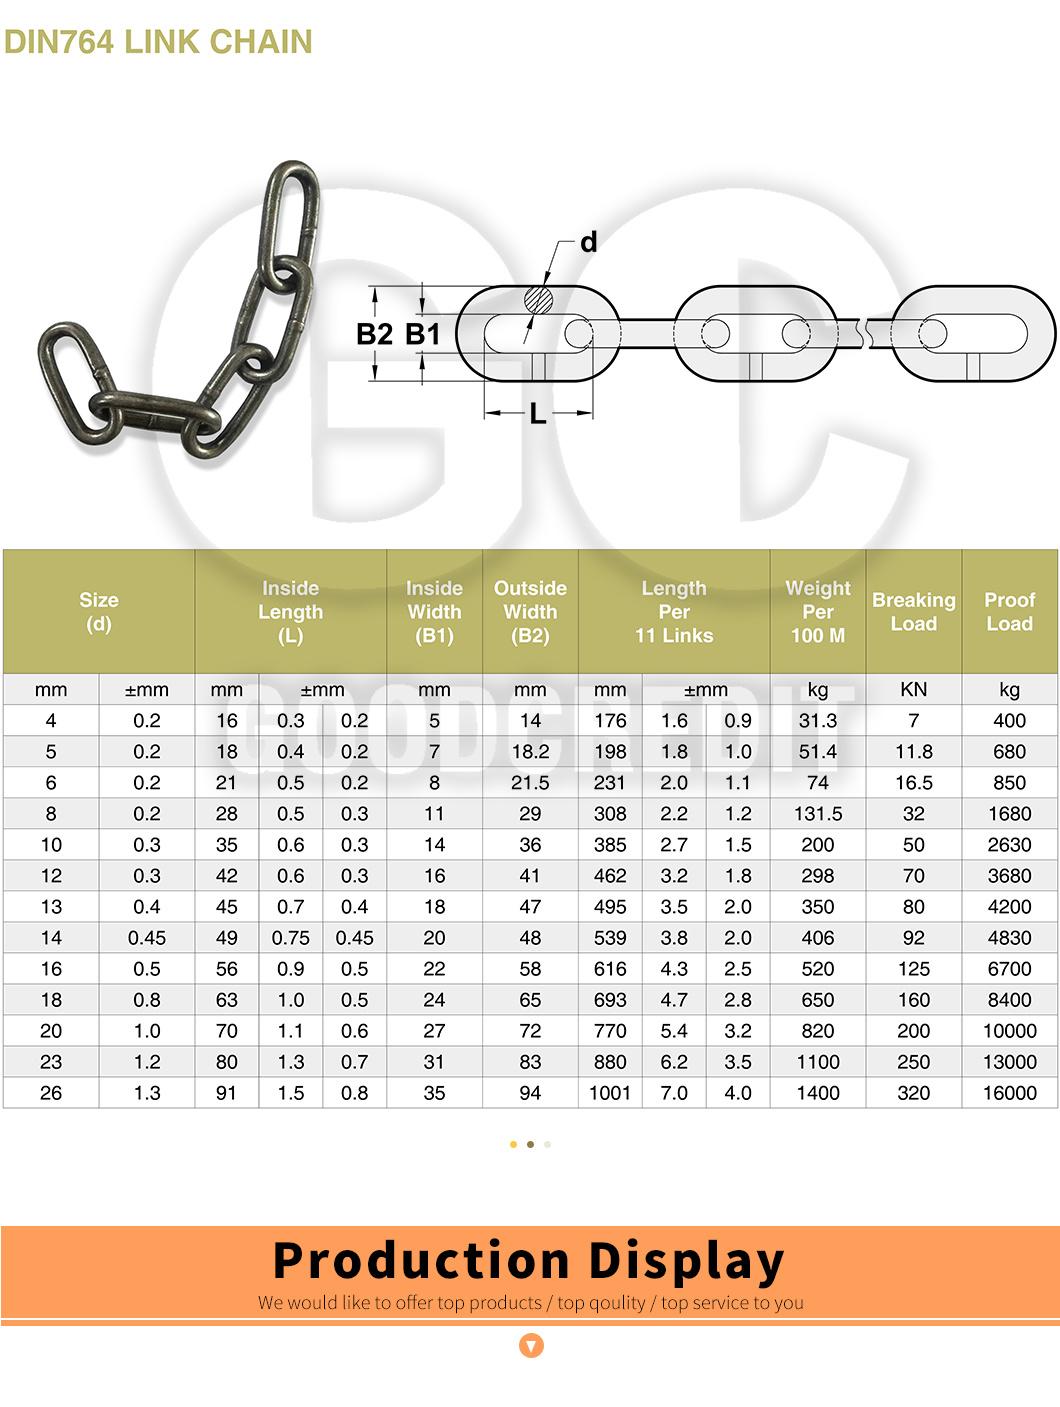 Galvanized Welded DIN 763 Long Short Link Chain with Best Price